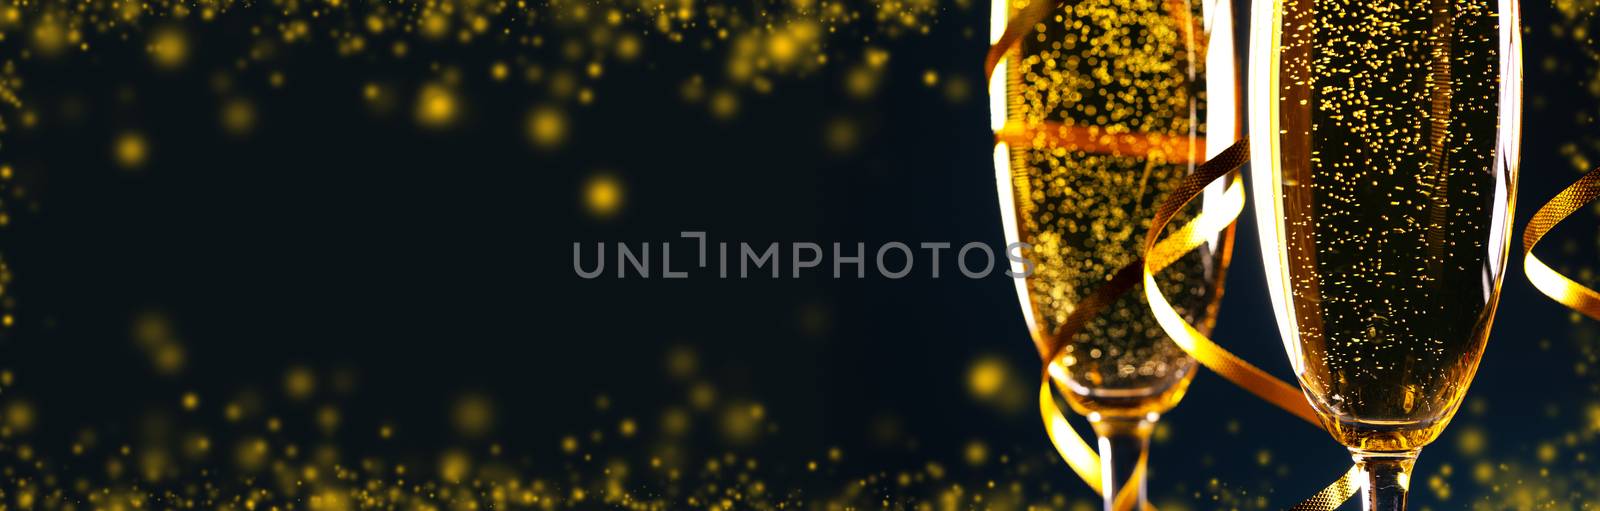 Champagne glasses with golden ribbon on black background with copy space - new year holiday celebration